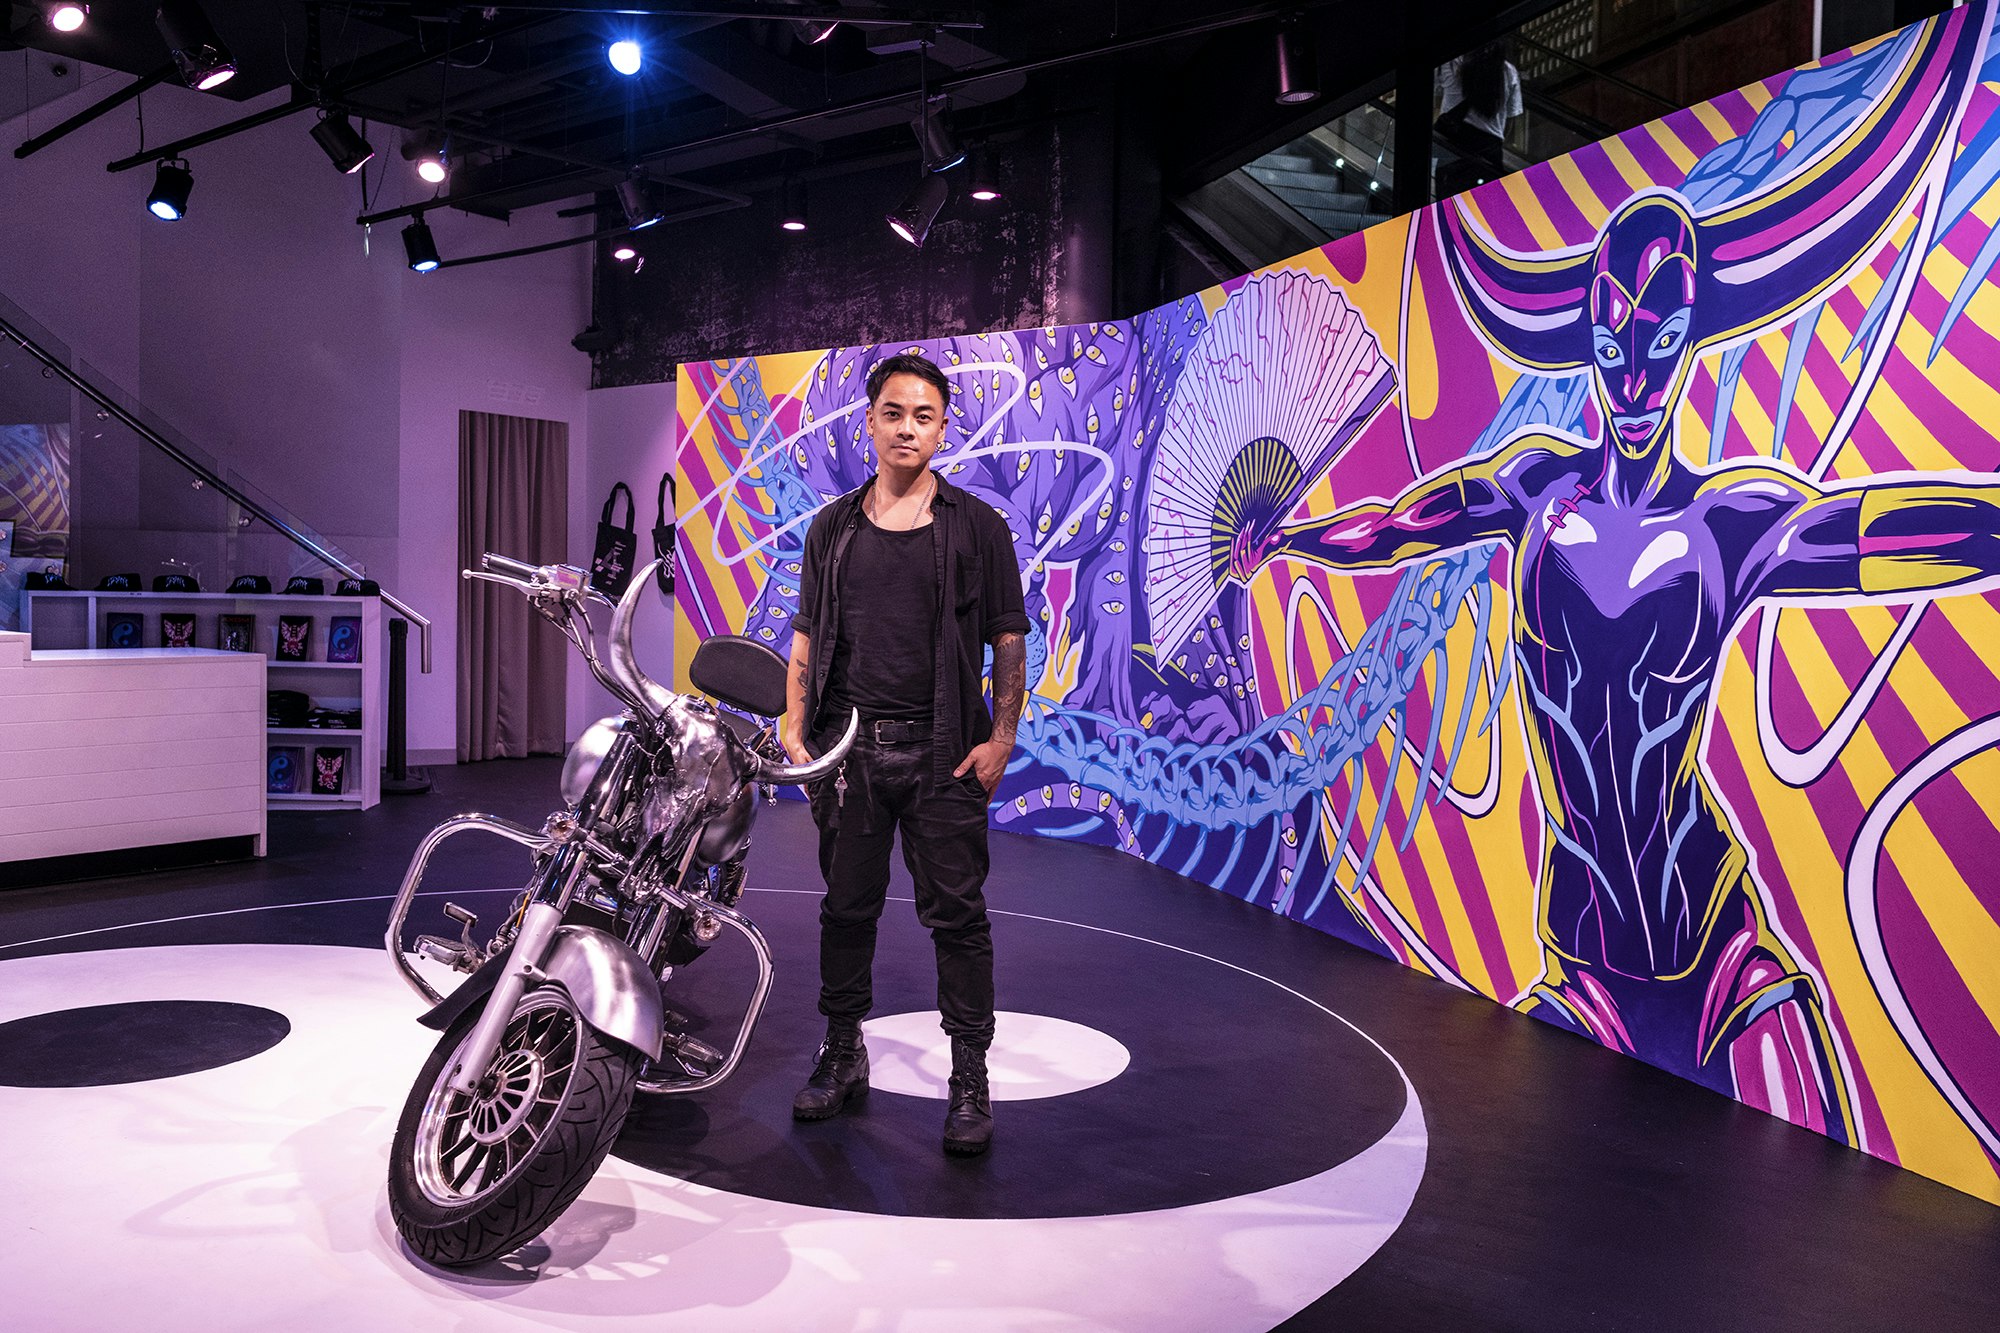 A Thai-Australian artist in a black top and black pants and boots stands next to a chrome motorbike against a long neon pink and yellow mural.